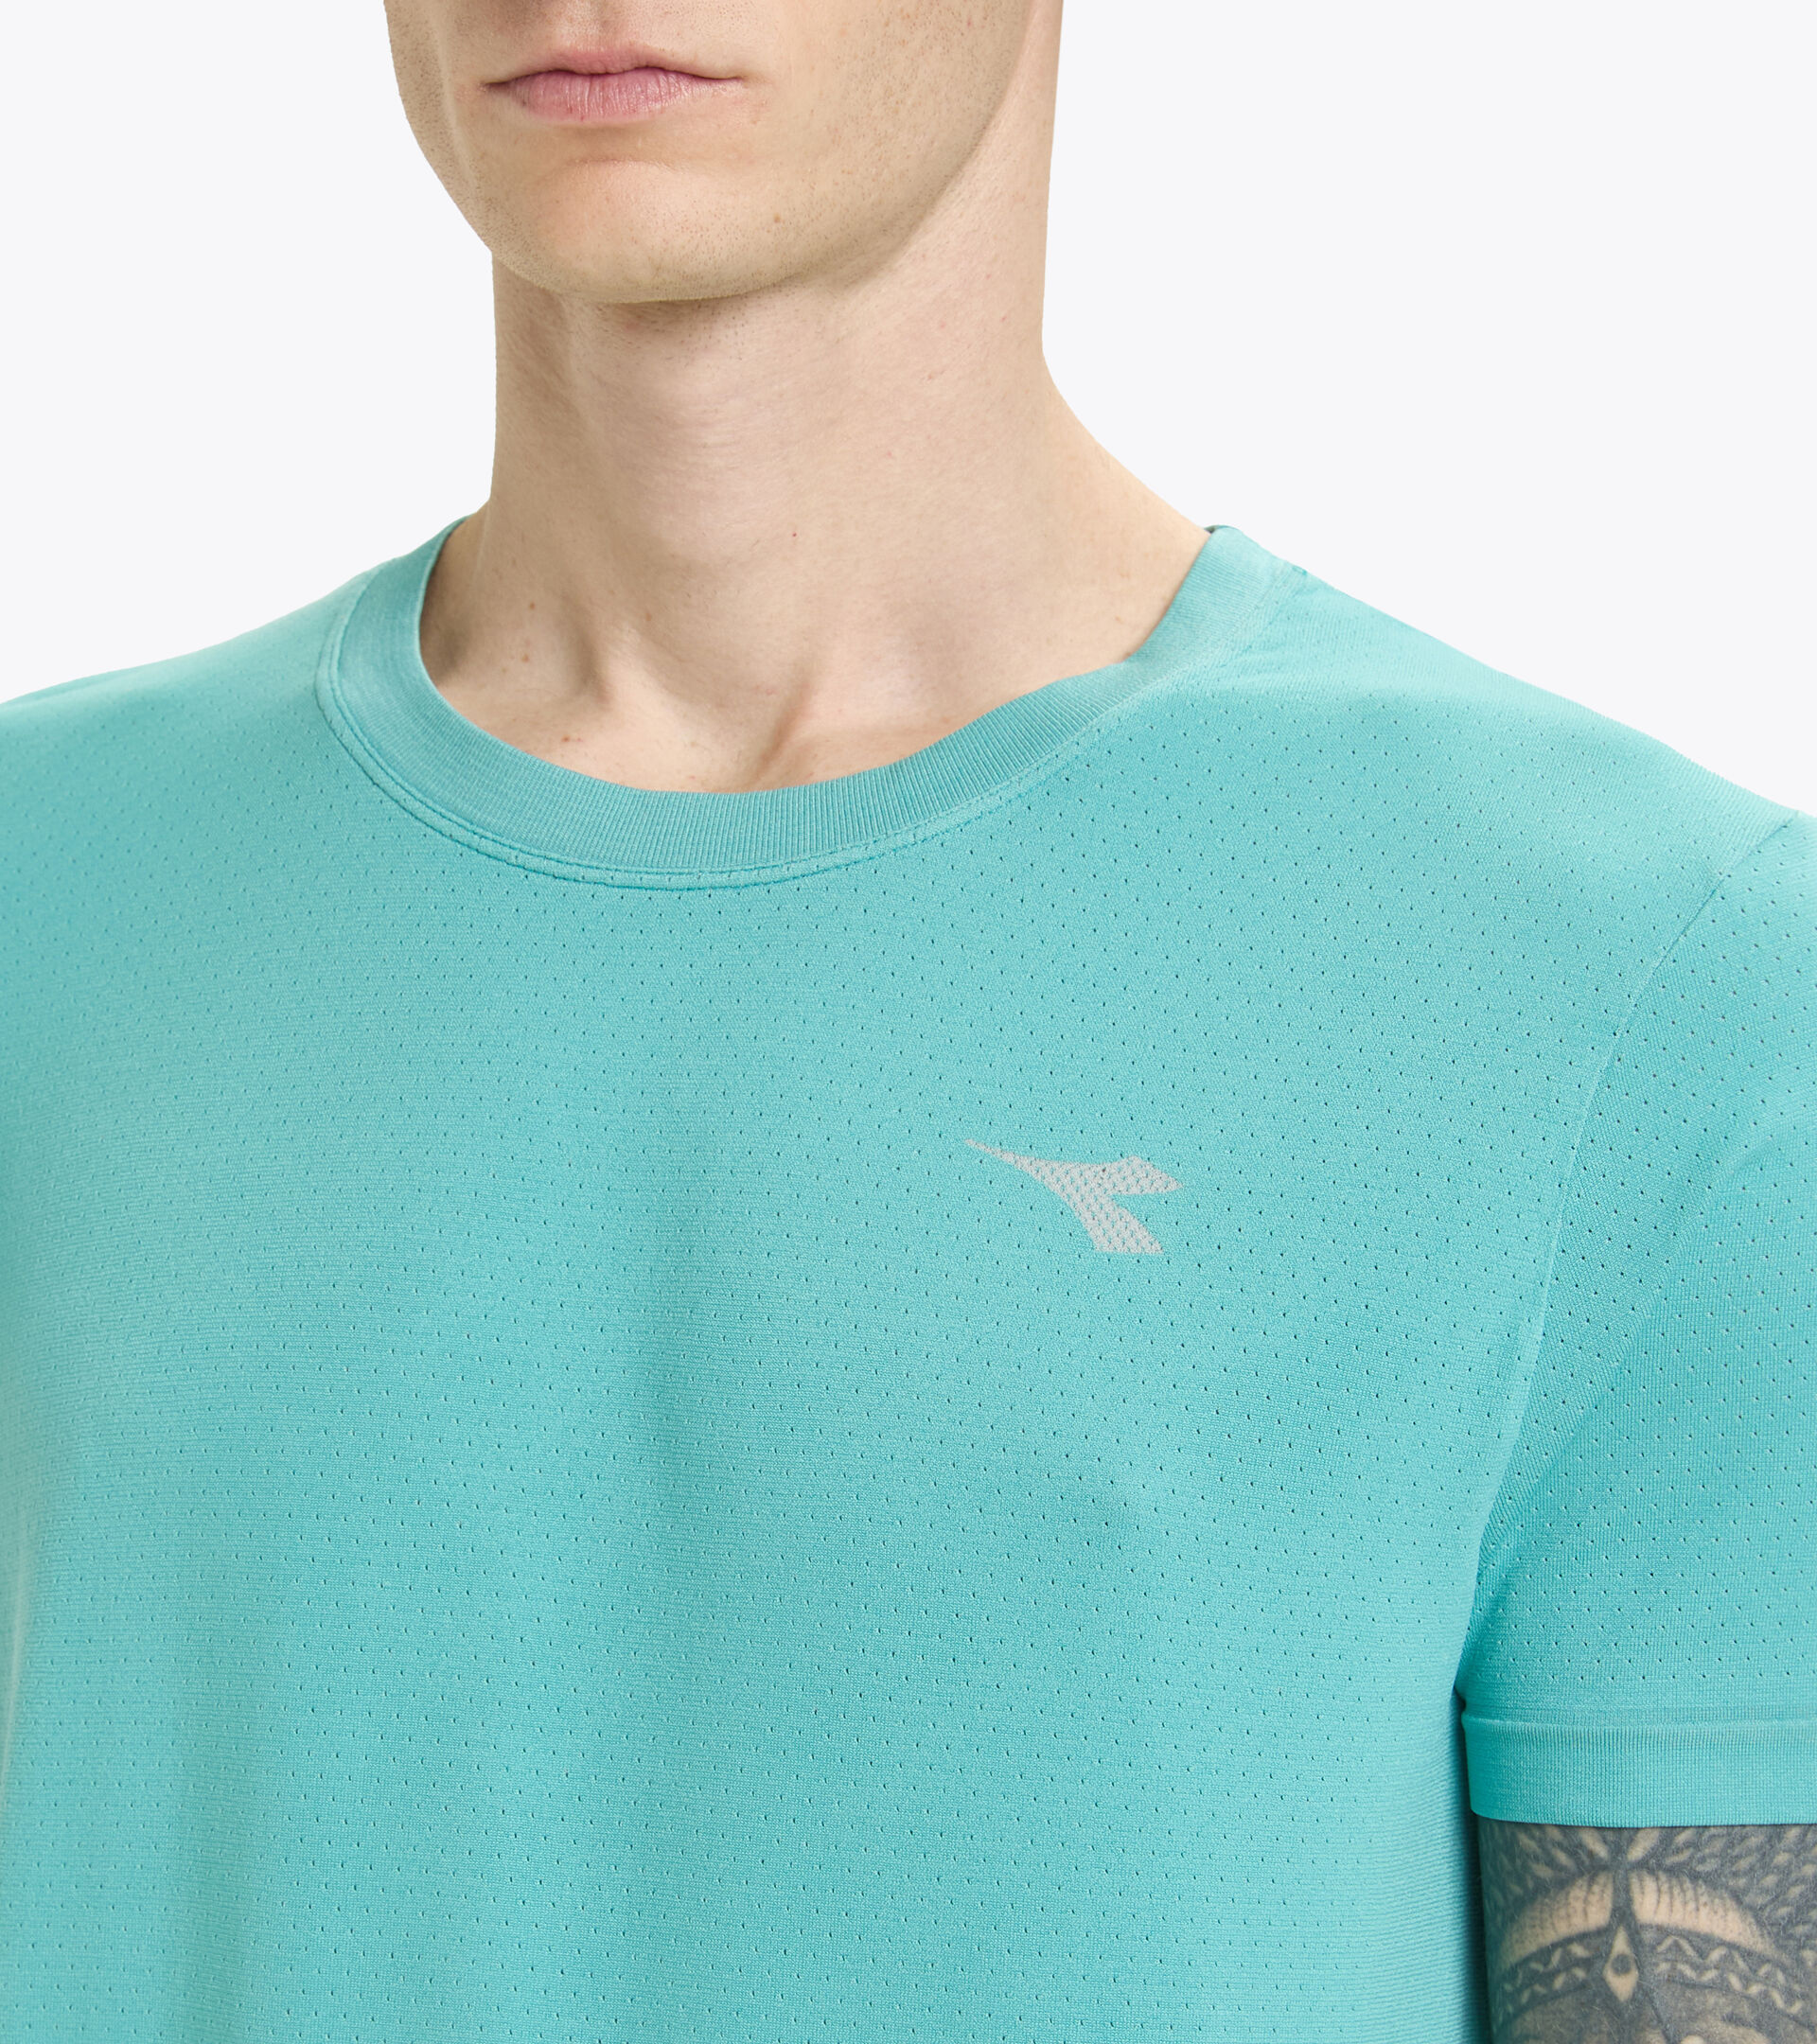 Seamless running t-shirt - Made in Italy - Men’s SS T-SHIRT SKIN FRIENDLY DUSTY TURQUOISE - Diadora